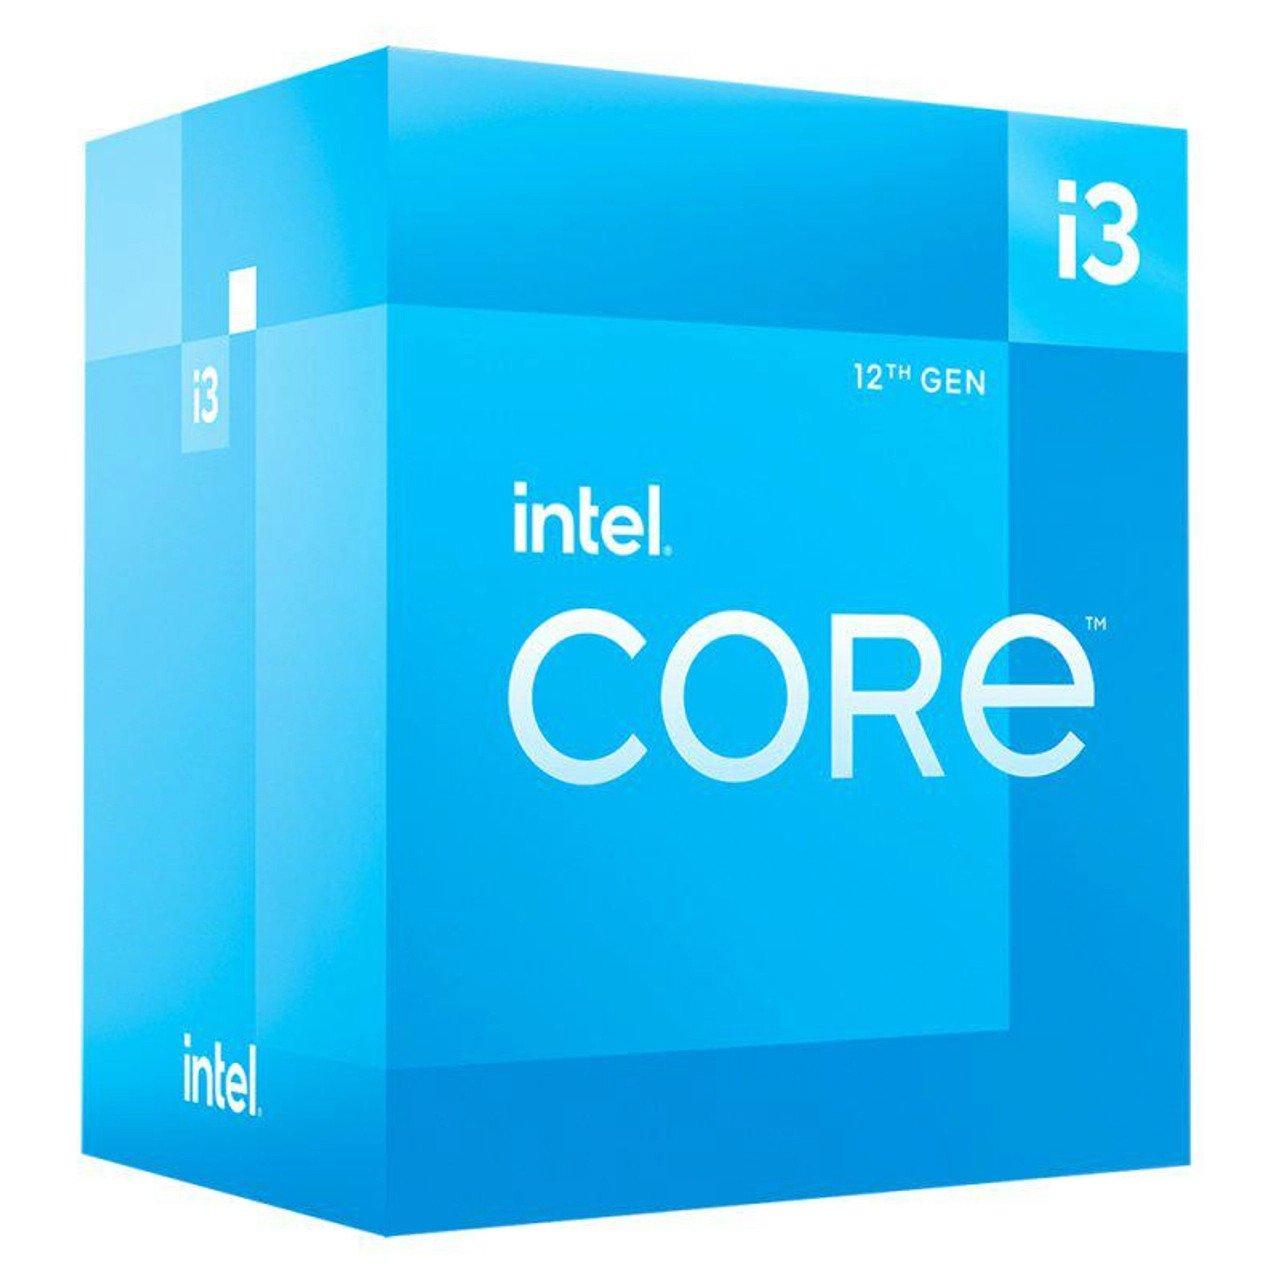 INTEL CORE I3-12100 12M Cache, up to 4.30 GHz